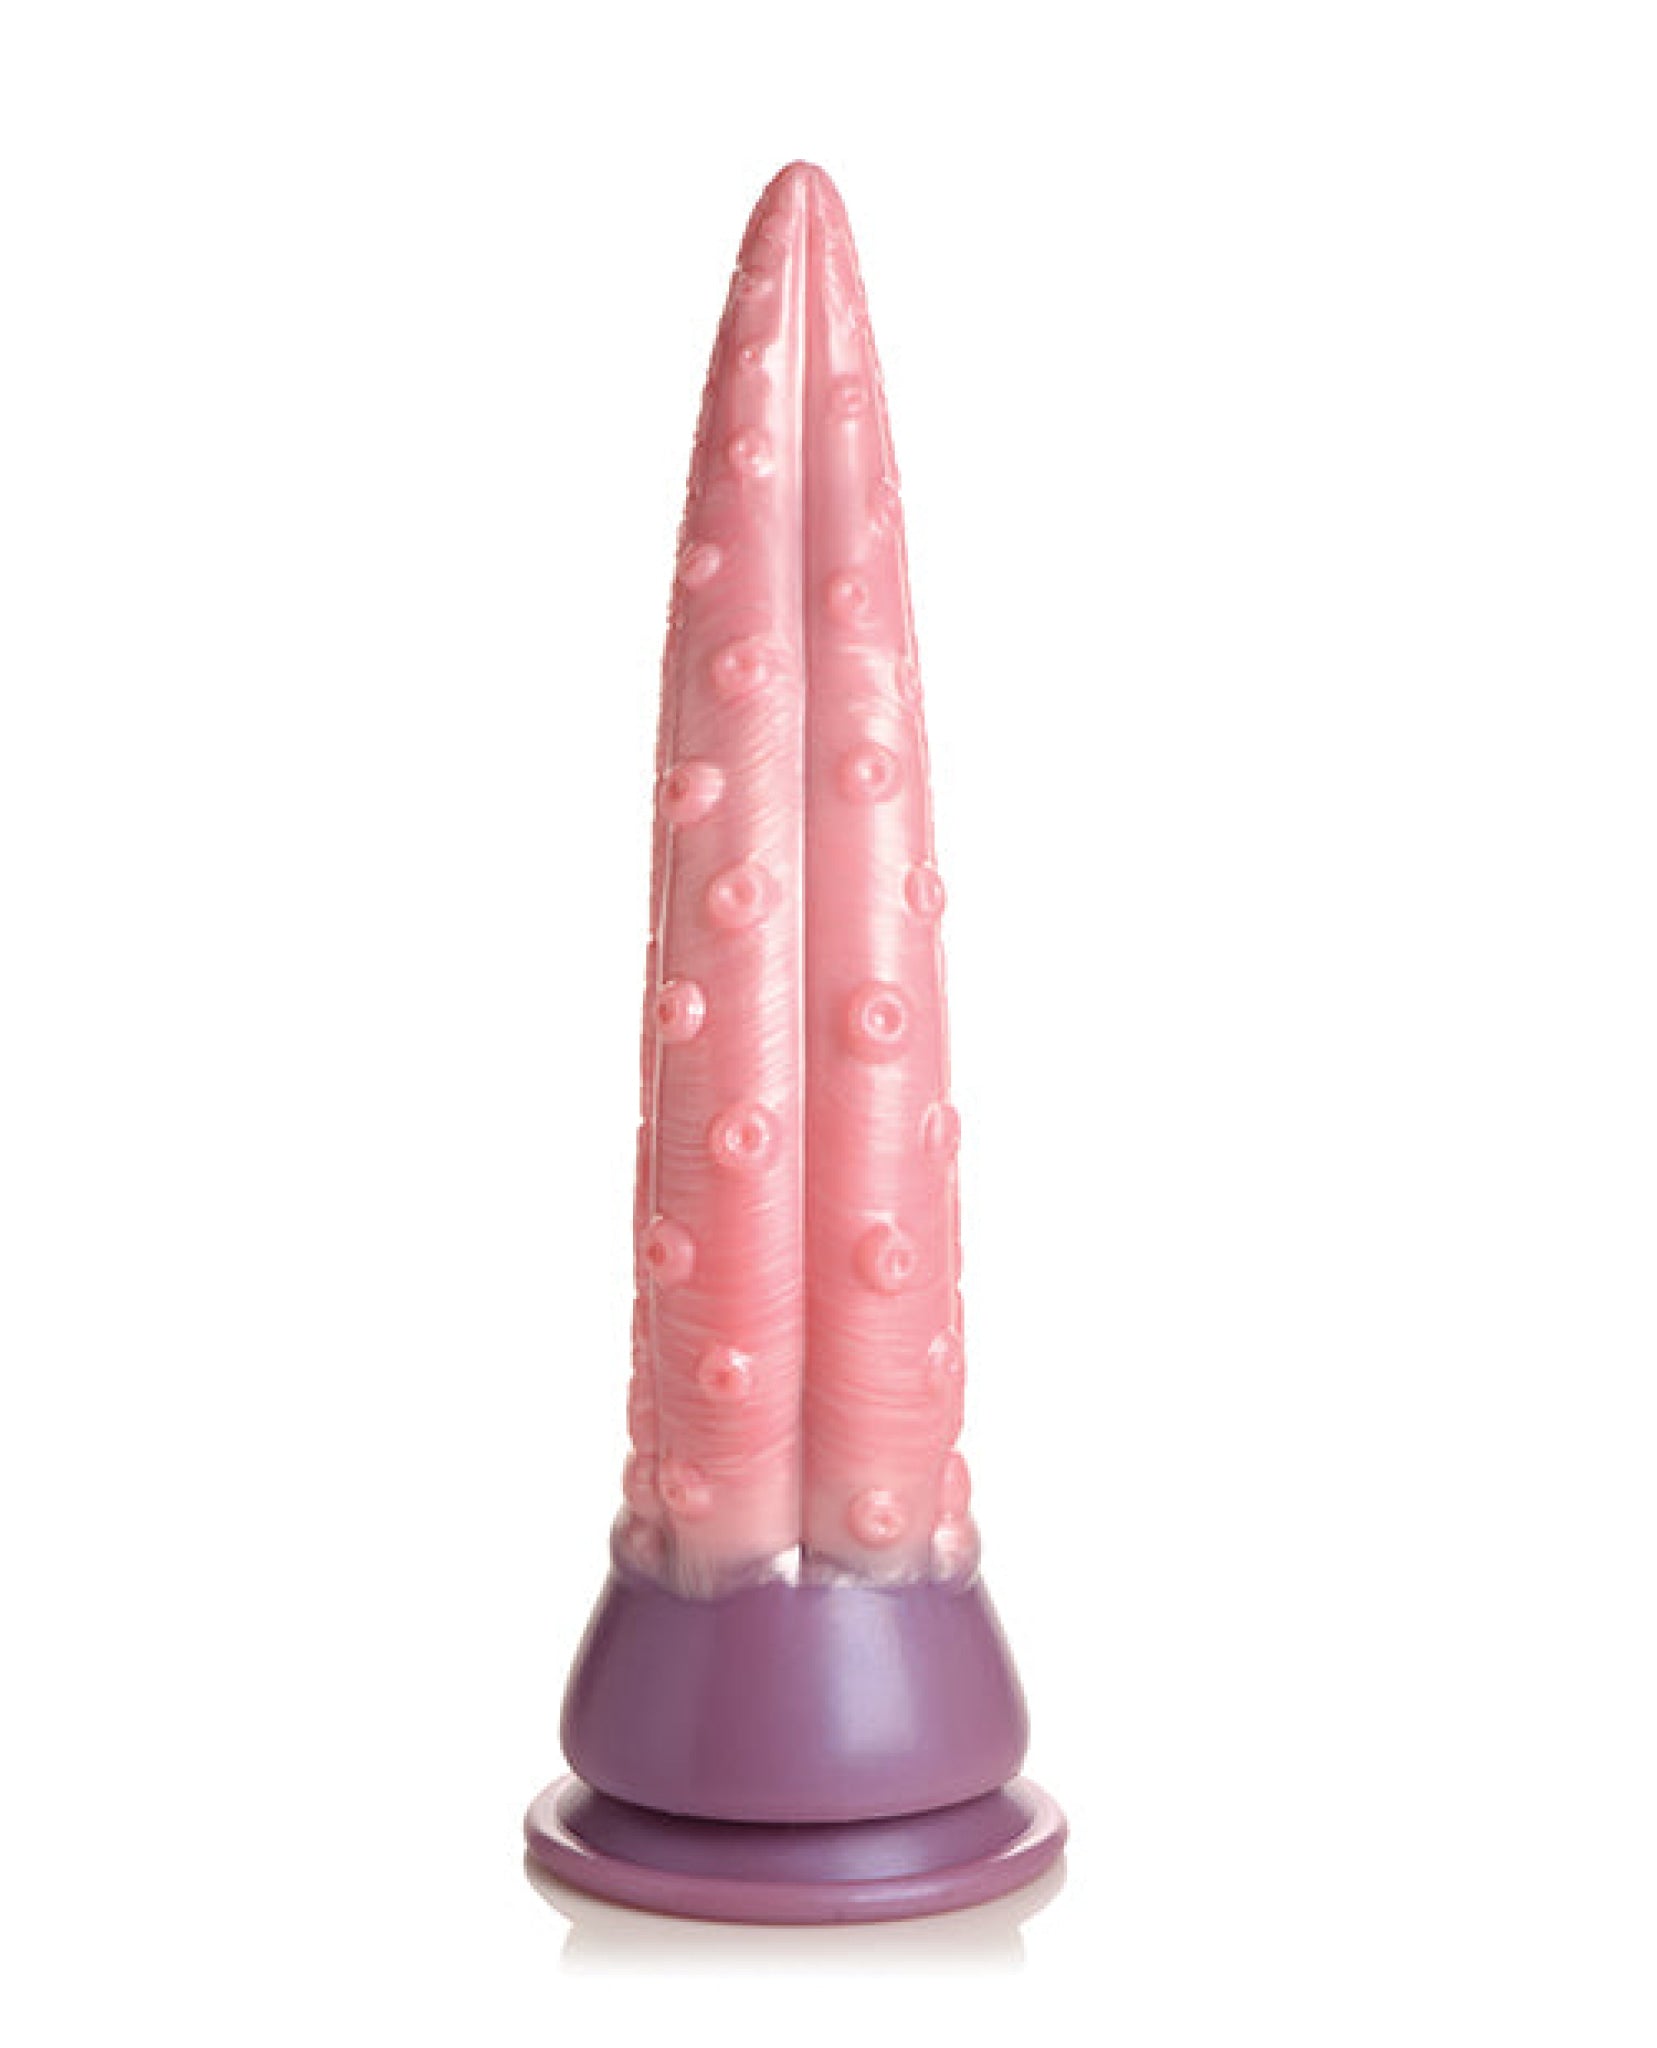 Creature Cocks Octoprobe Tentacle Silicone Dildo - Pink/Purple Xr LLC